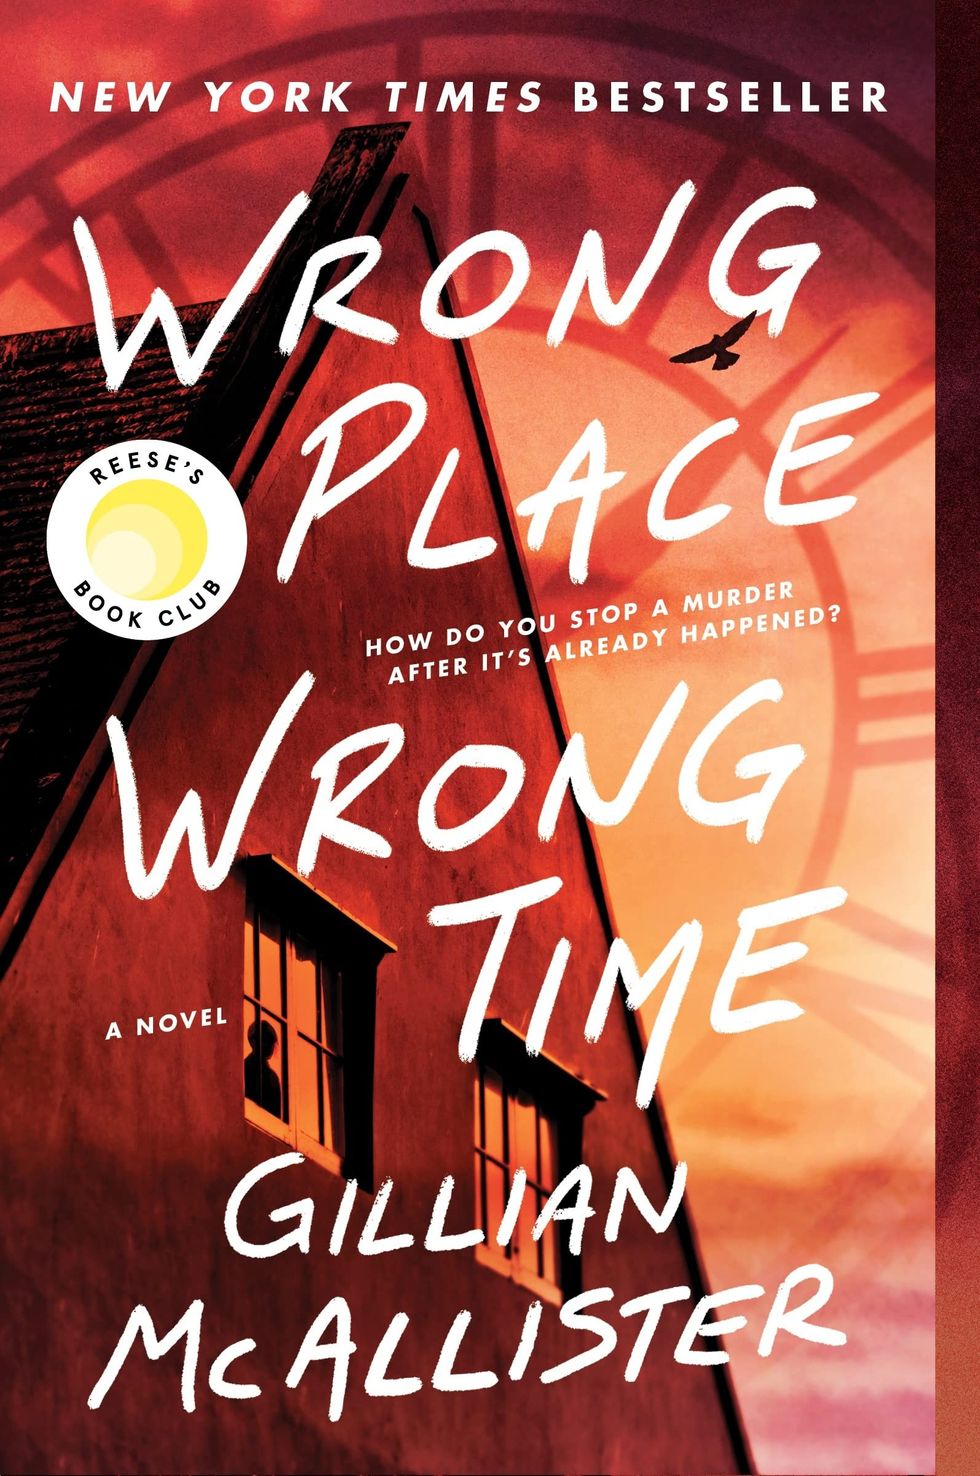 "Wrong Place, Wrong Time" by Gillian McAllister